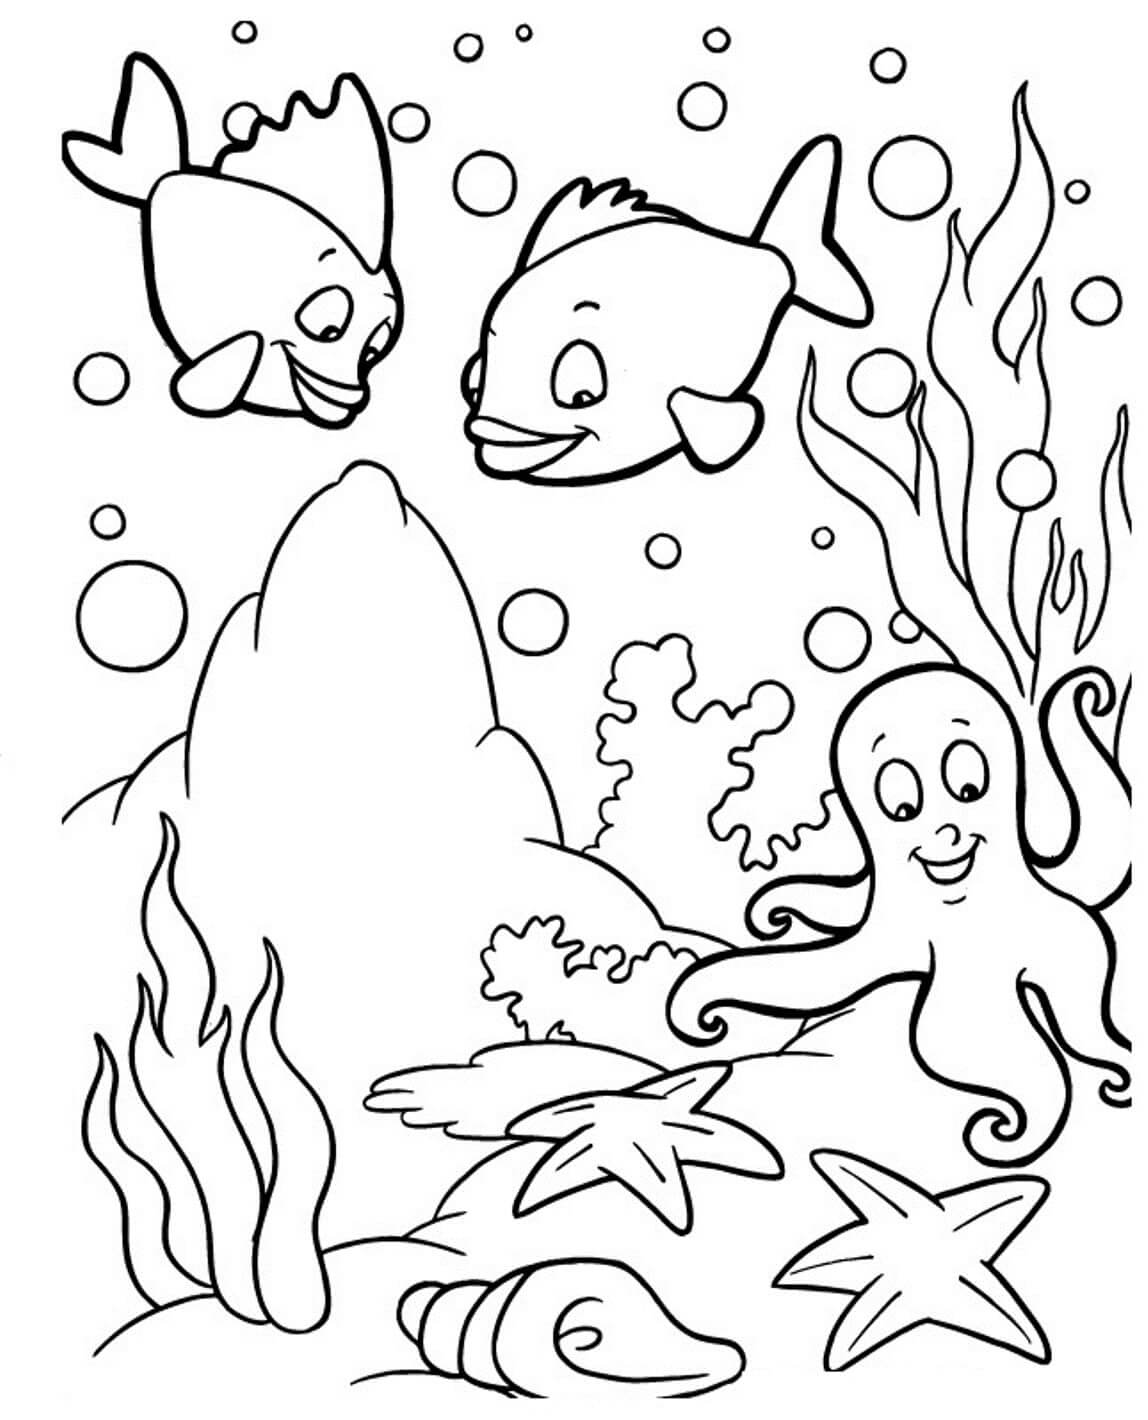 Fish, Octopus, StarFish & Sea Plants - Sea Animals Coloring Printables For Kids - Animal illustrations for kids to complete with colour